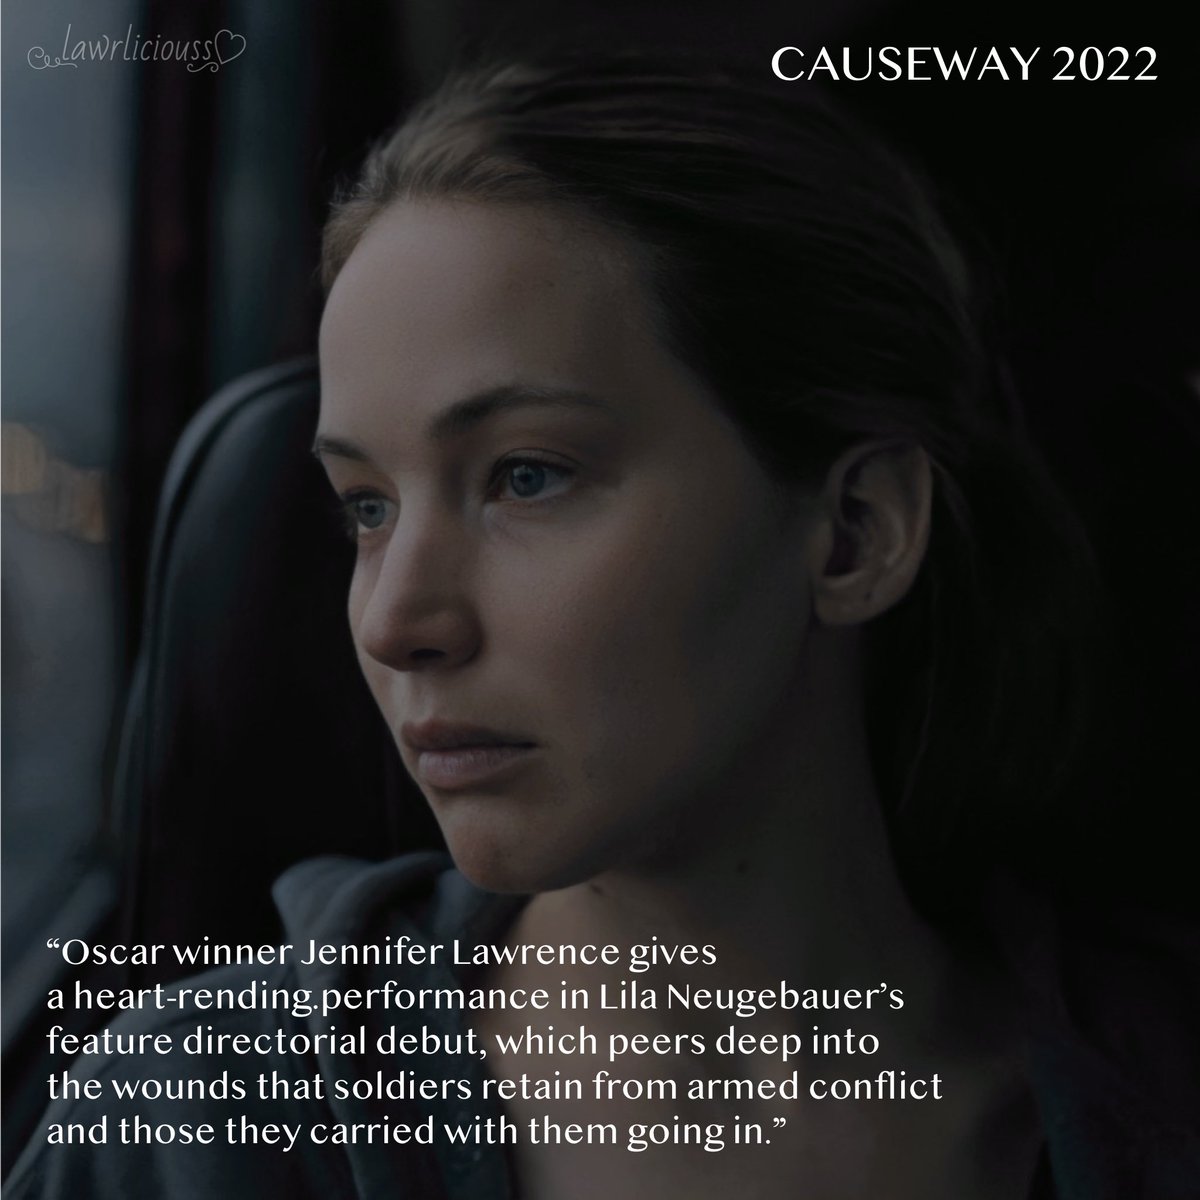 🎥“Oscar winner #JenniferLawrence gives a heart-rending performance in #LilaNeugebauer’s feature directorial debut, which peers deep into the wounds that soldiers retain from armed conflict — and those they carried with them going in.” — @TIFF_NET | #CAUSEWAY synopsis  #a24